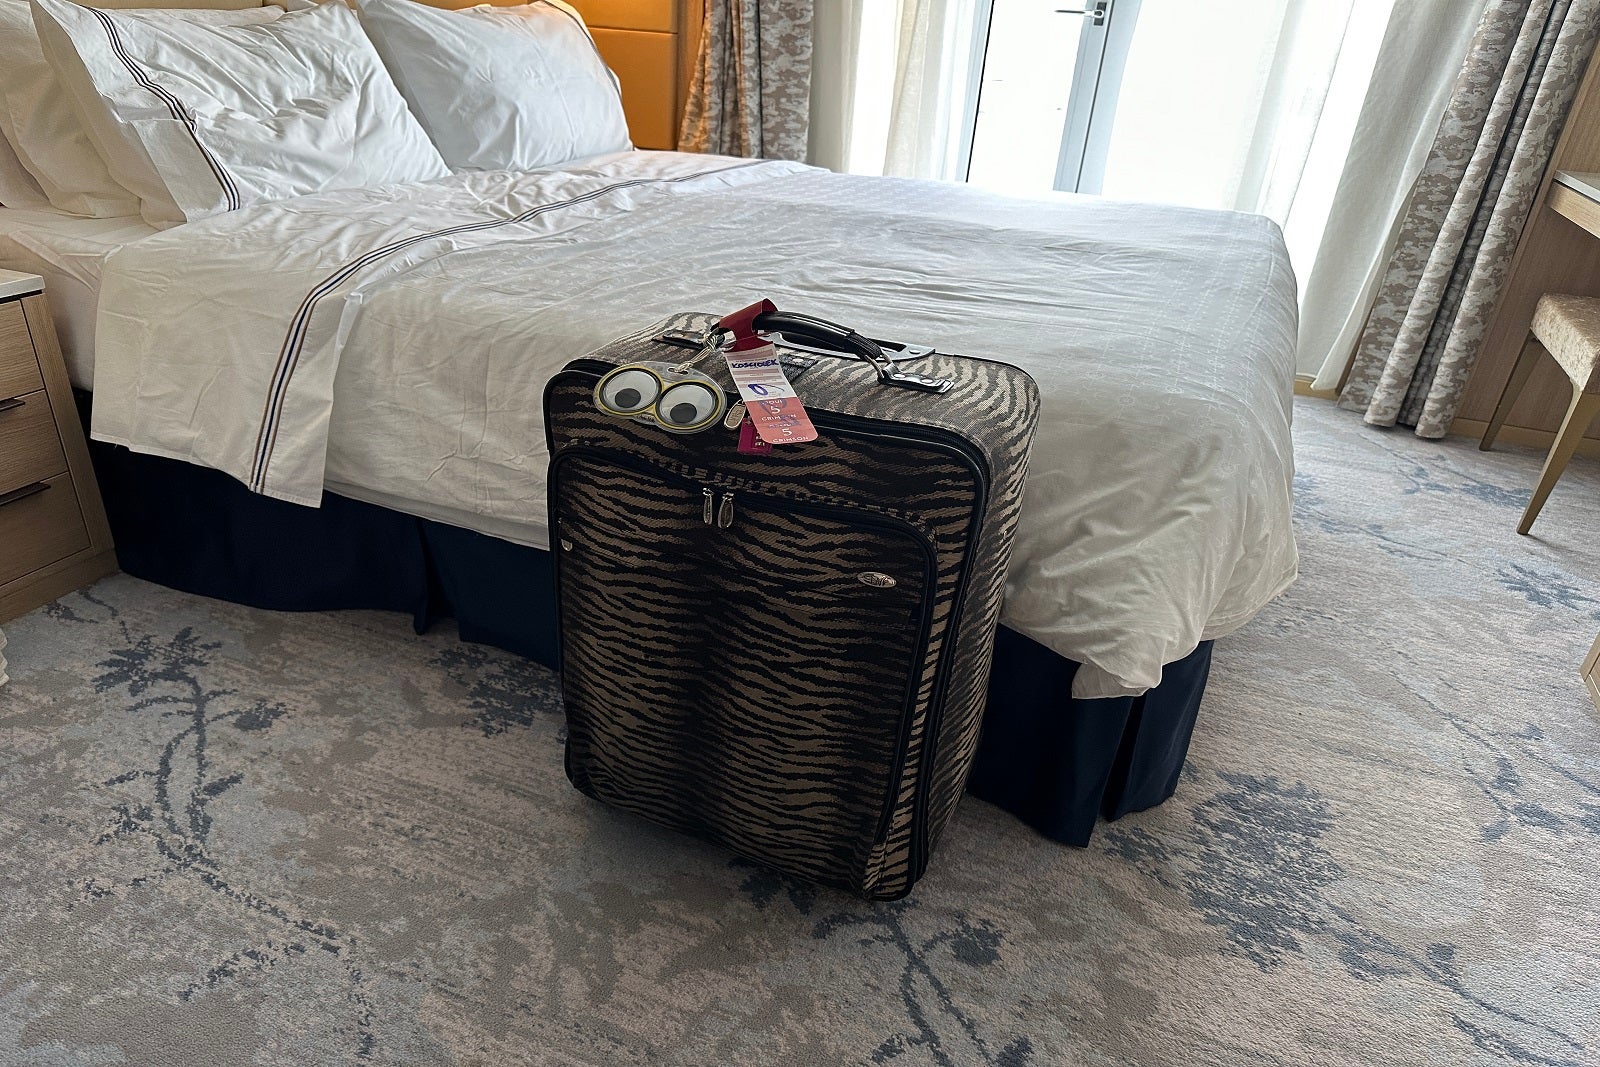 the suitcase in a hotel room